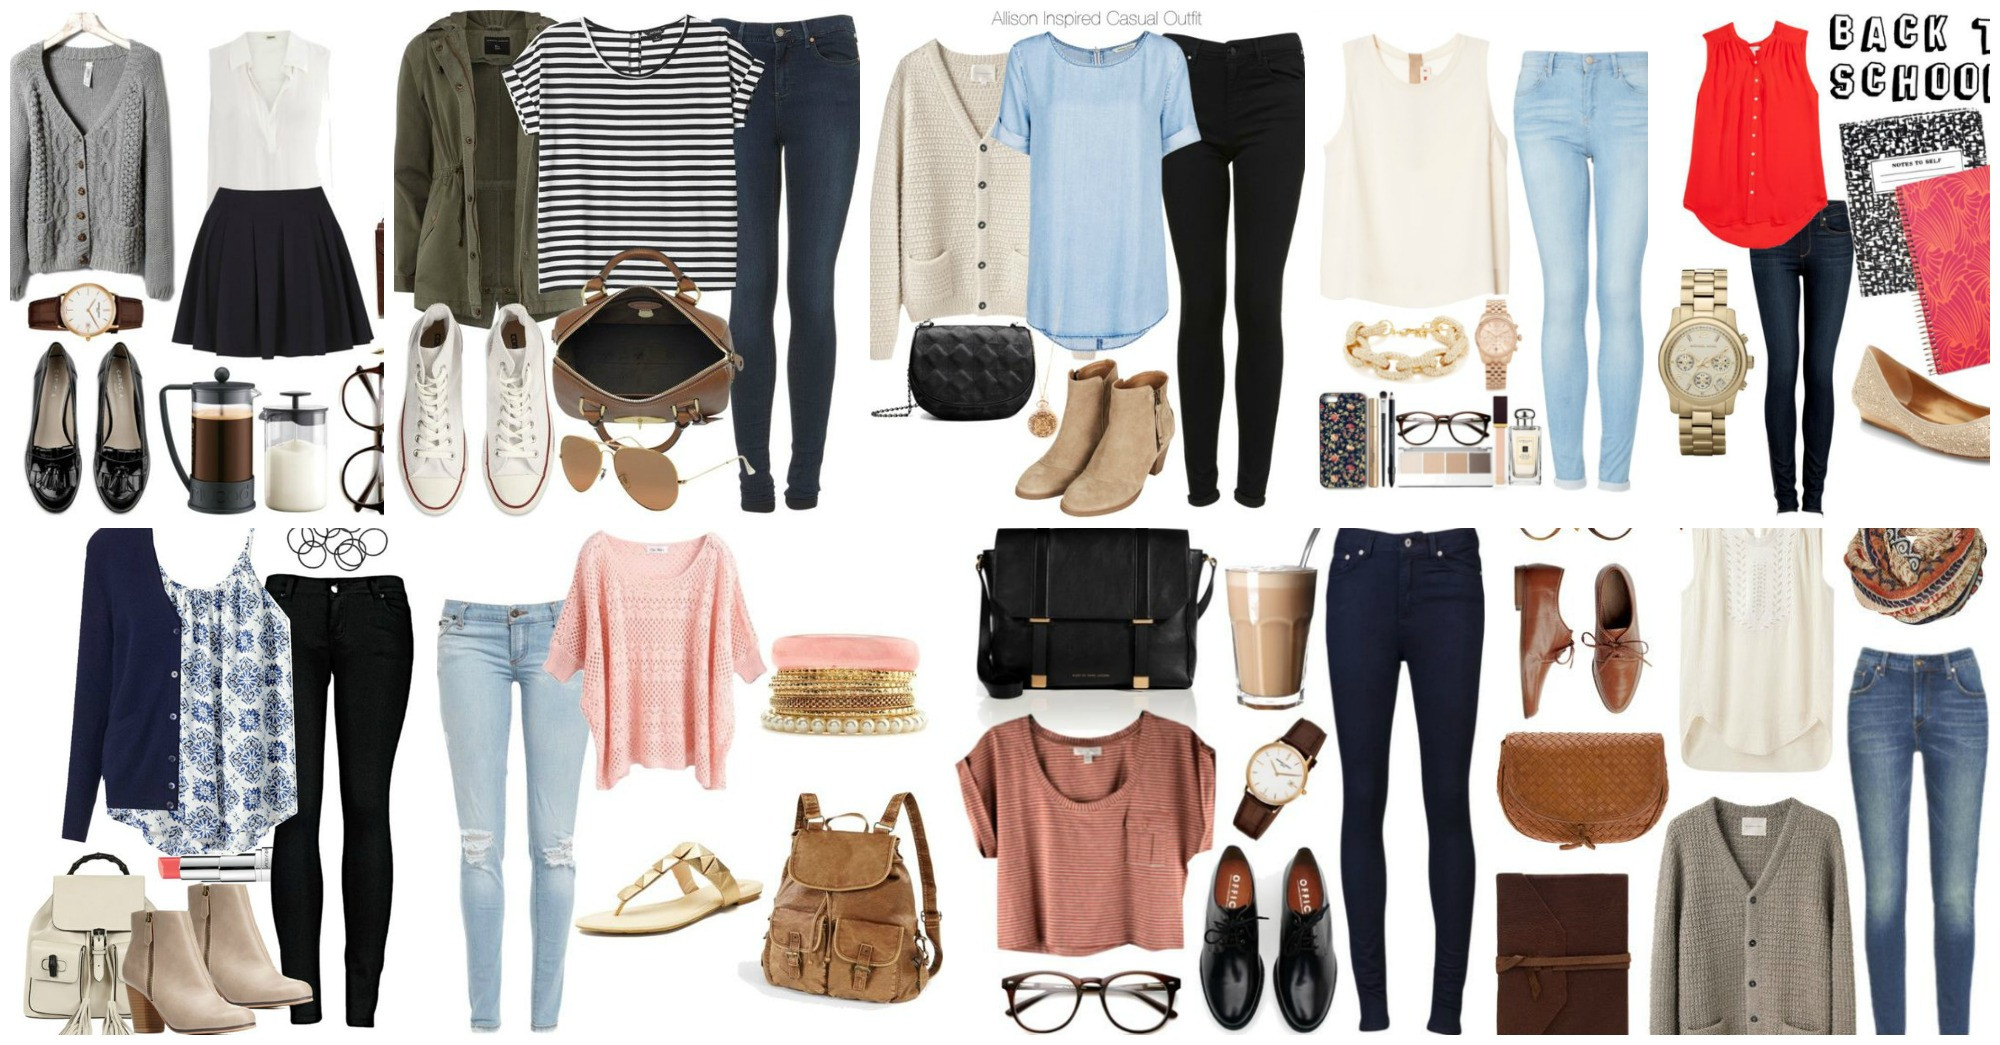 Back To School Outfits
 15 Outstanding Back to School Outfits You Need to See Now